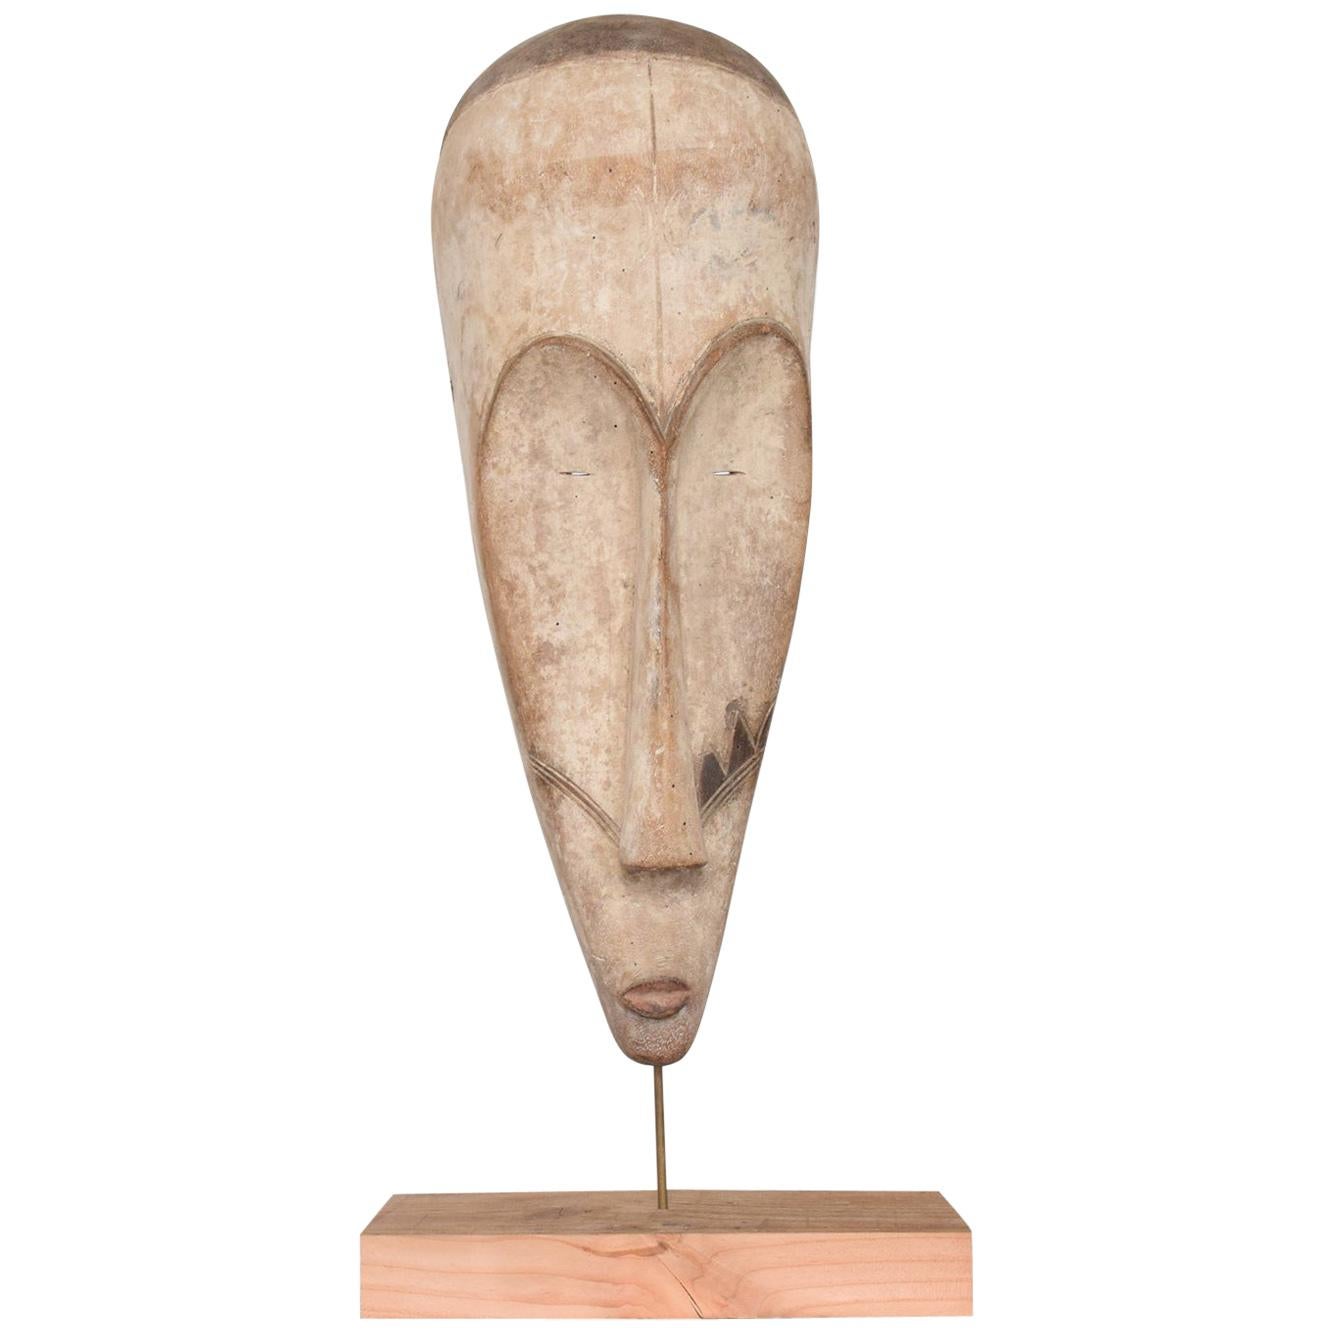 Tribal Africa Ngil Society Mask by Fang People of Gabon Guinea, 1960s